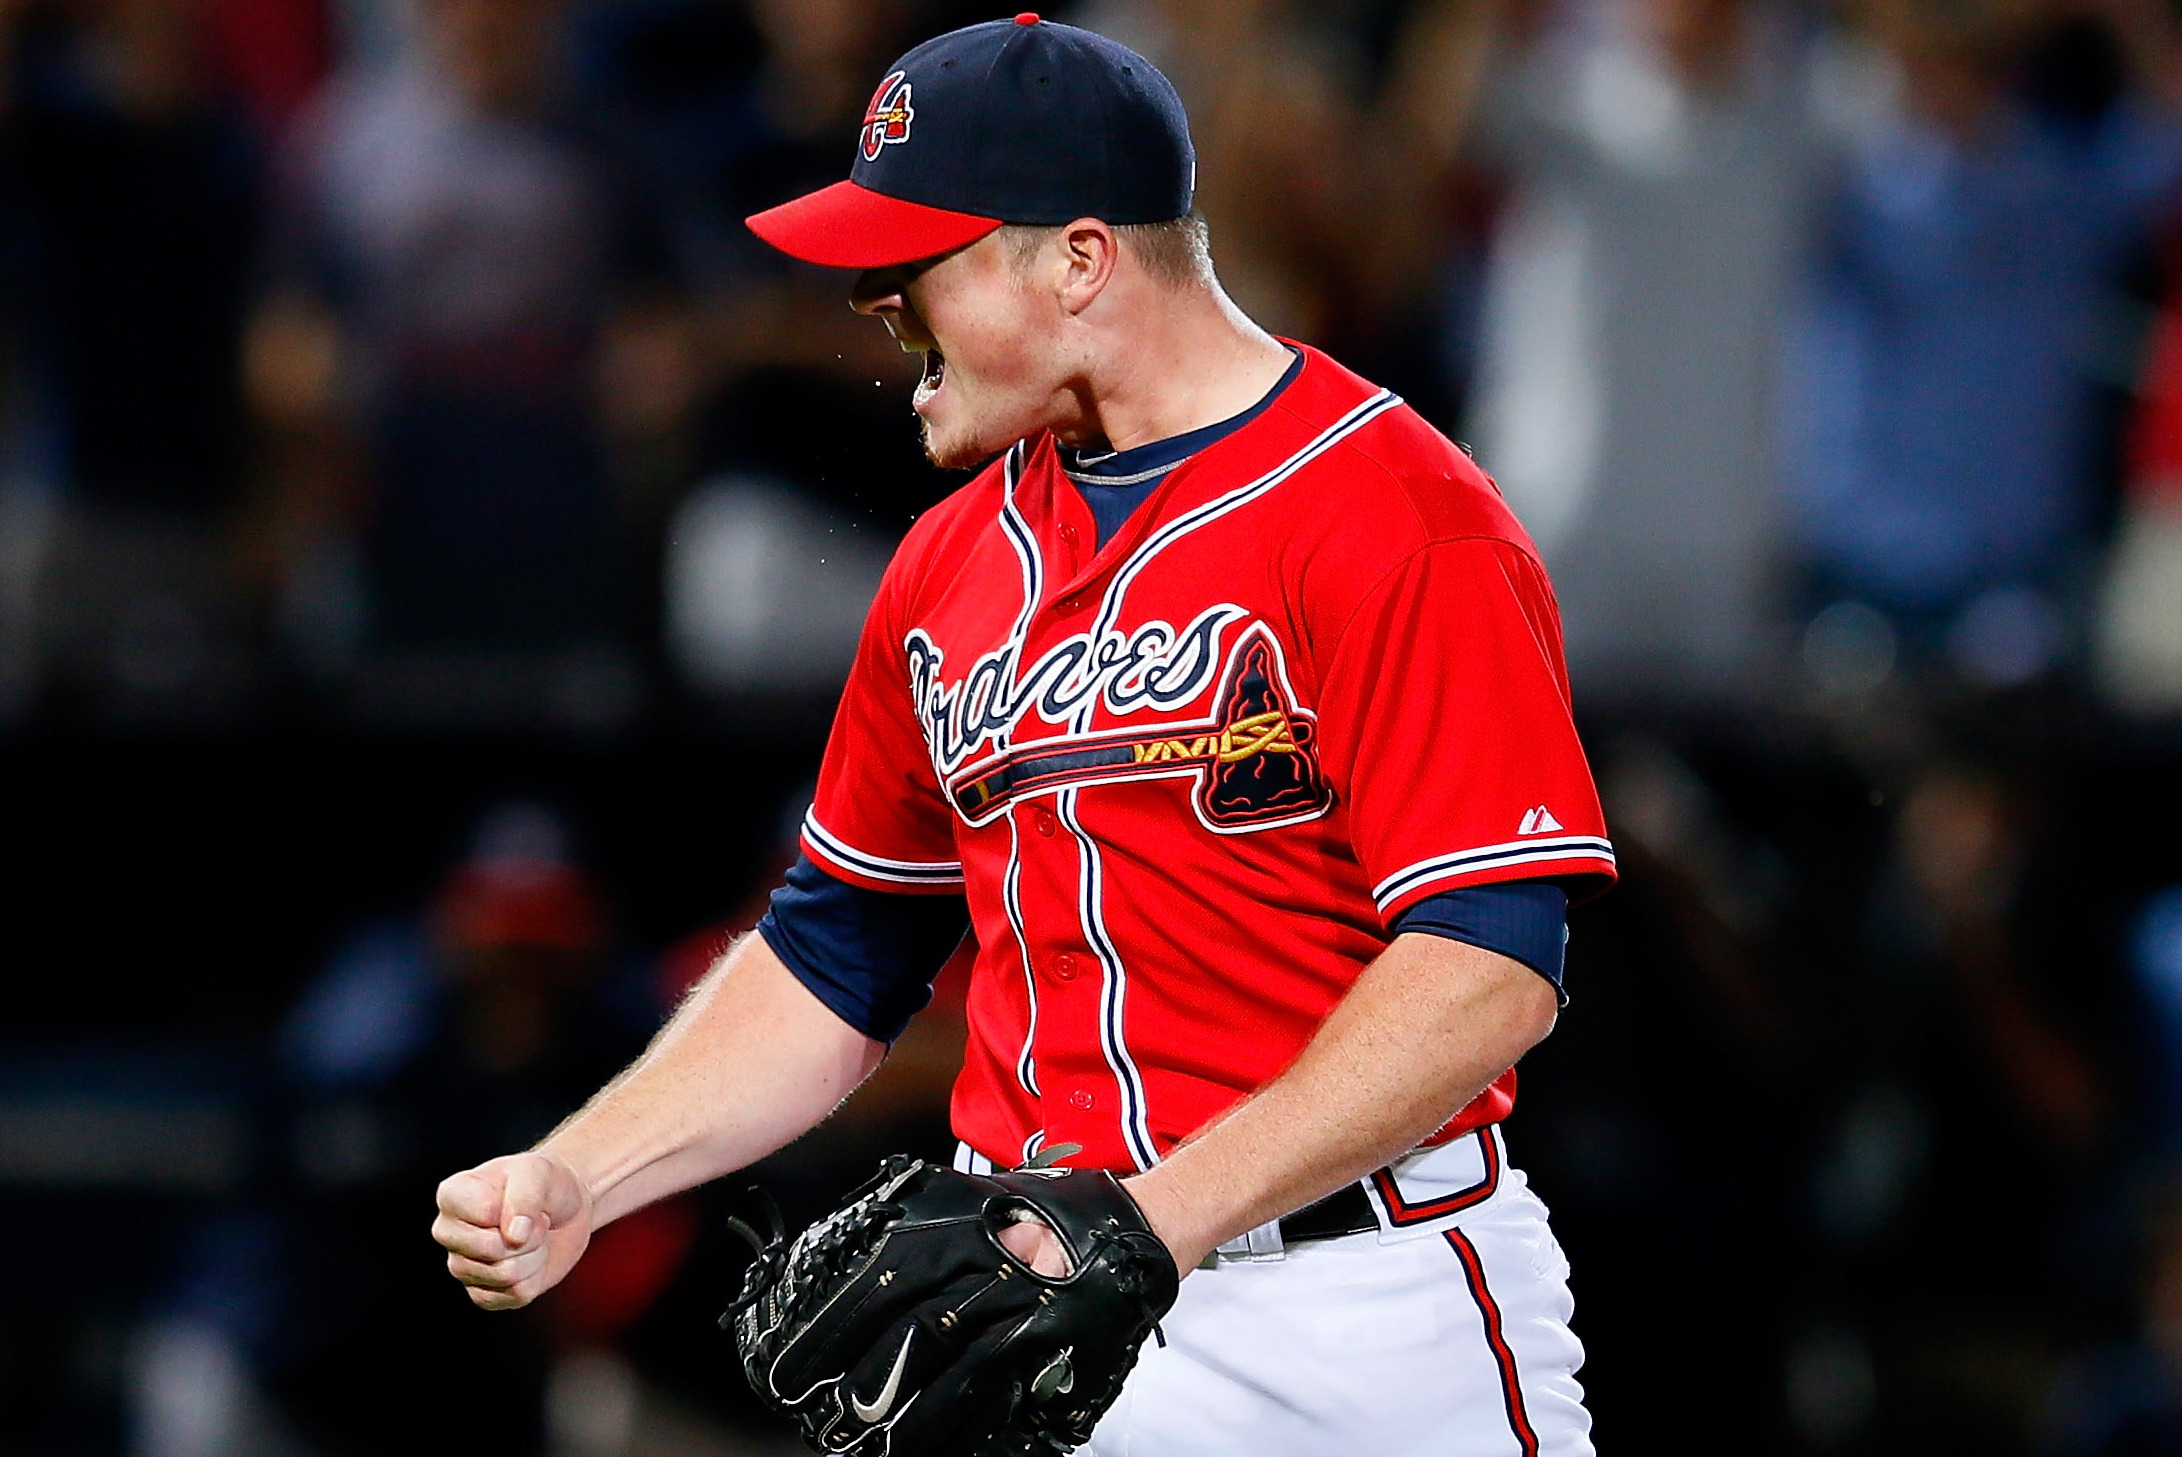 Craig Kimbrel: Braves Closer Dominating the National League One